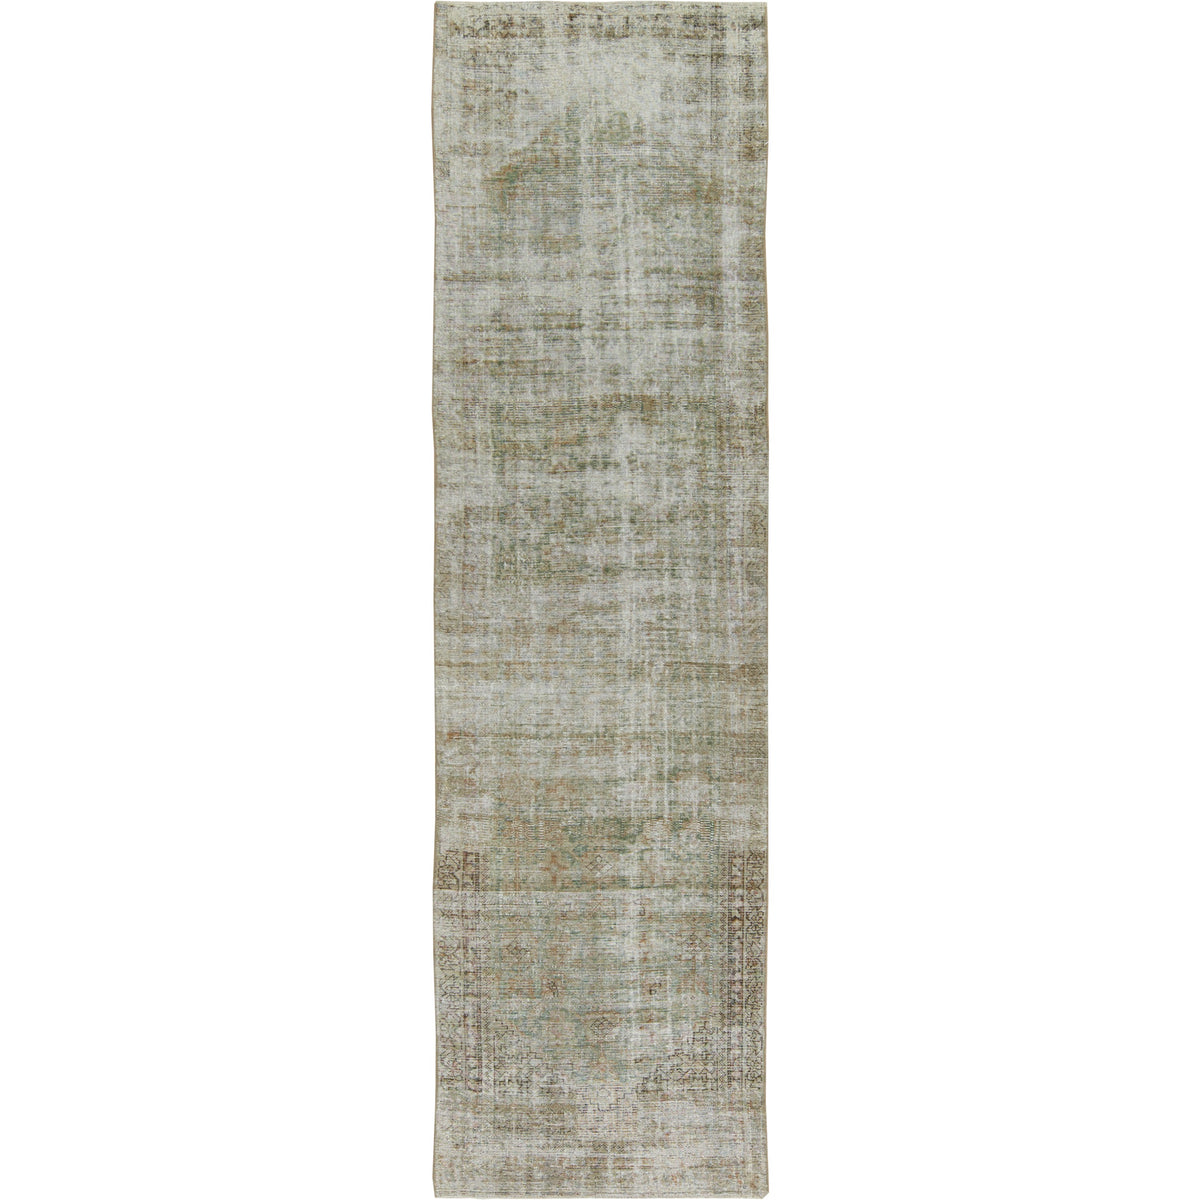 Placida - Vintage Turkish Rug, Enriching Spaces with Timeless Beauty | Kuden Rugs